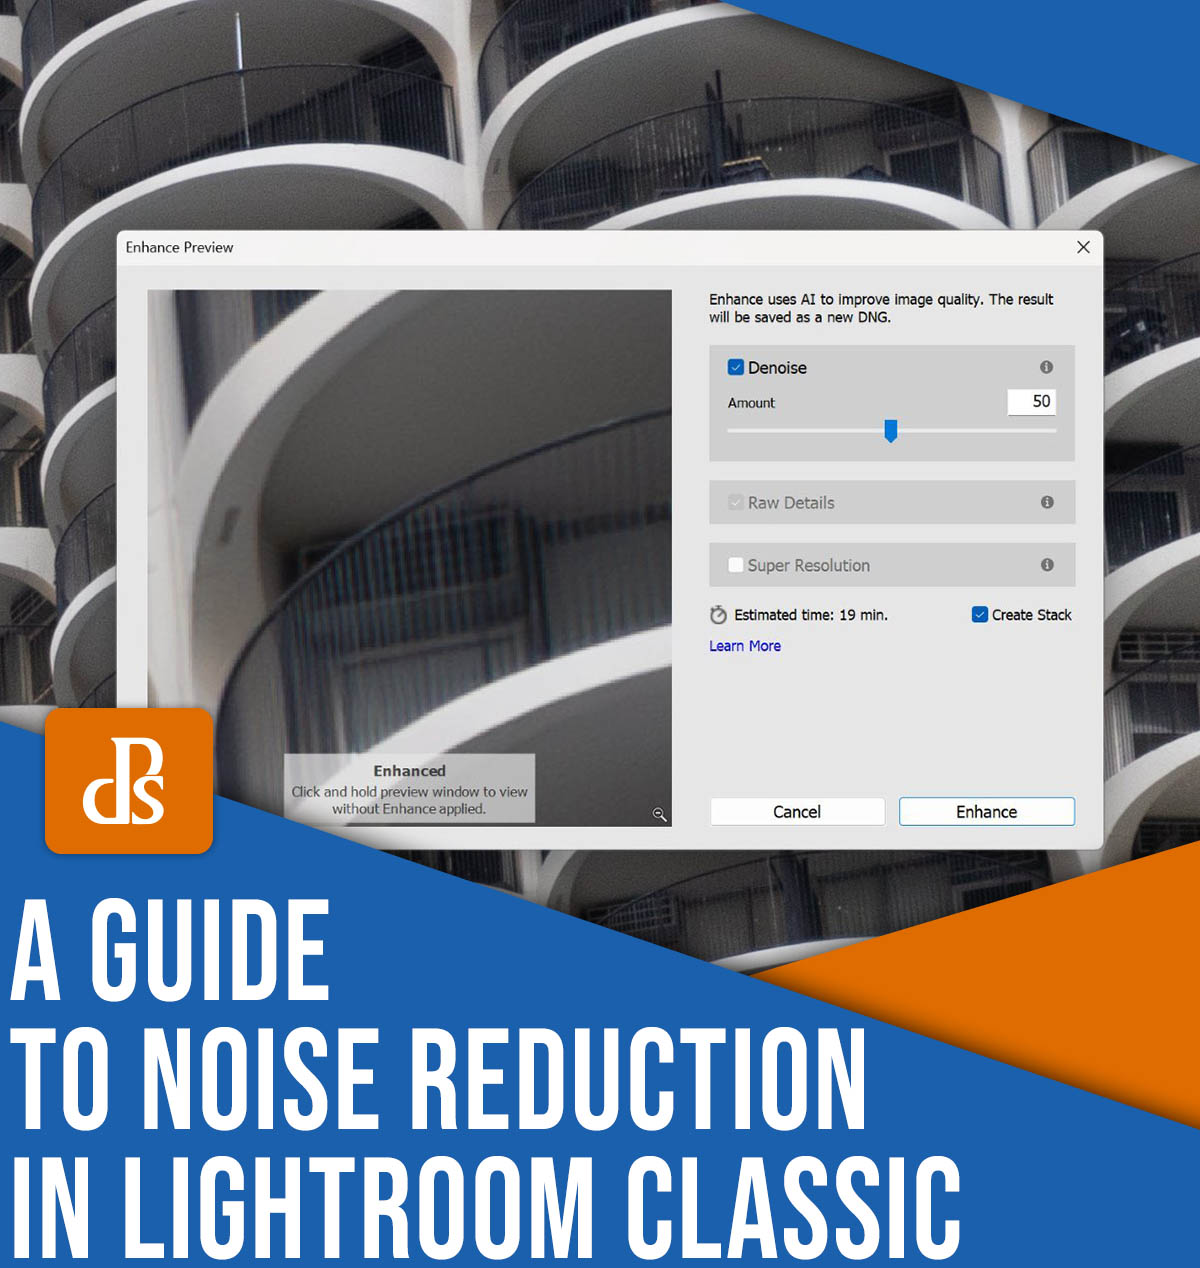 A guide to noise reduction in Lightroom Classic